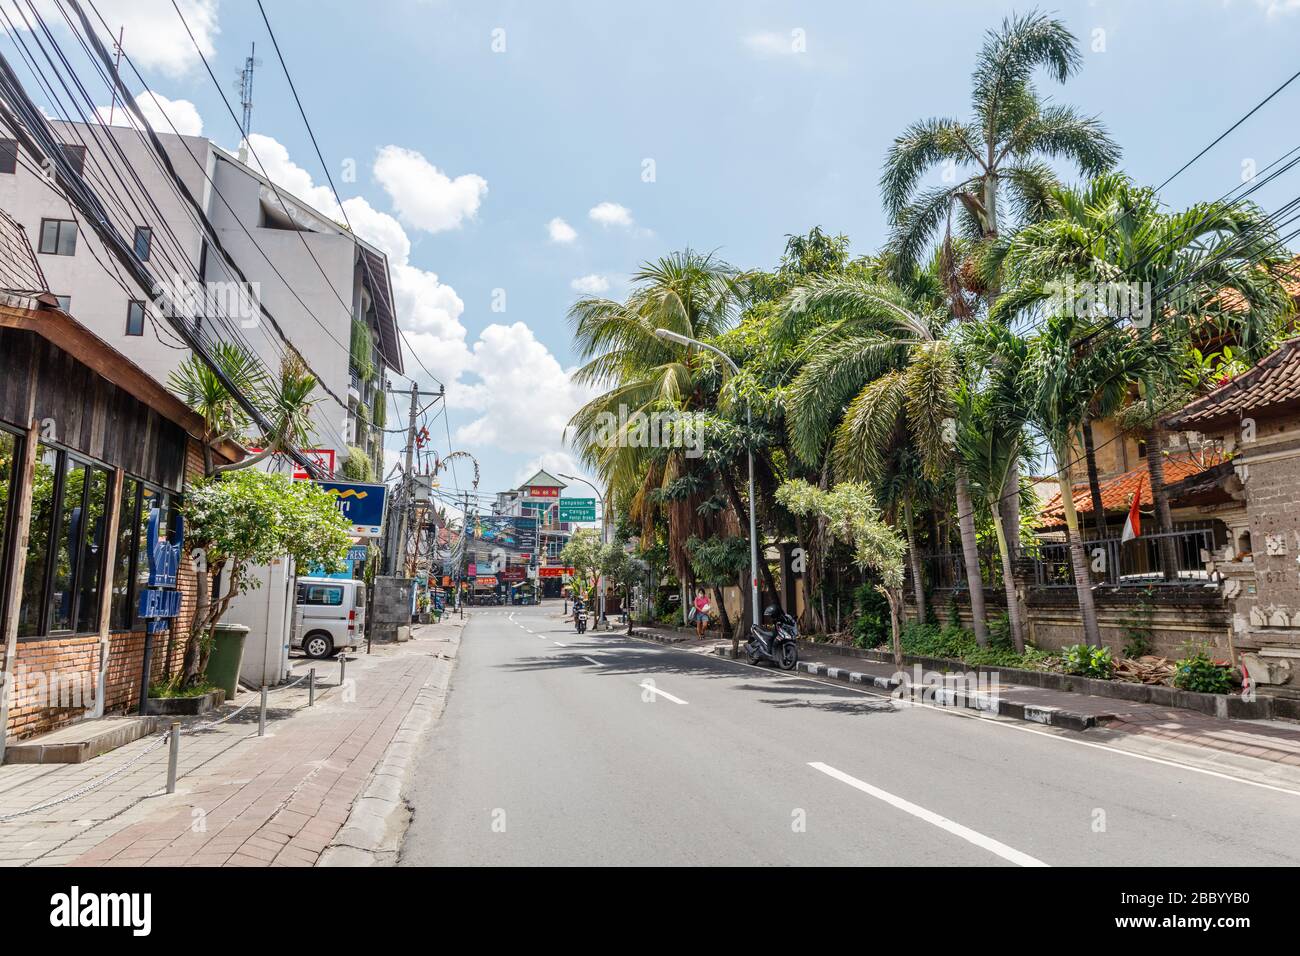 April, 01, 2020. Empty streets of Bali. Quarantine for COVID-19. Petitenget, one of Bali most popular tourist areas. Indonesia. Stock Photo